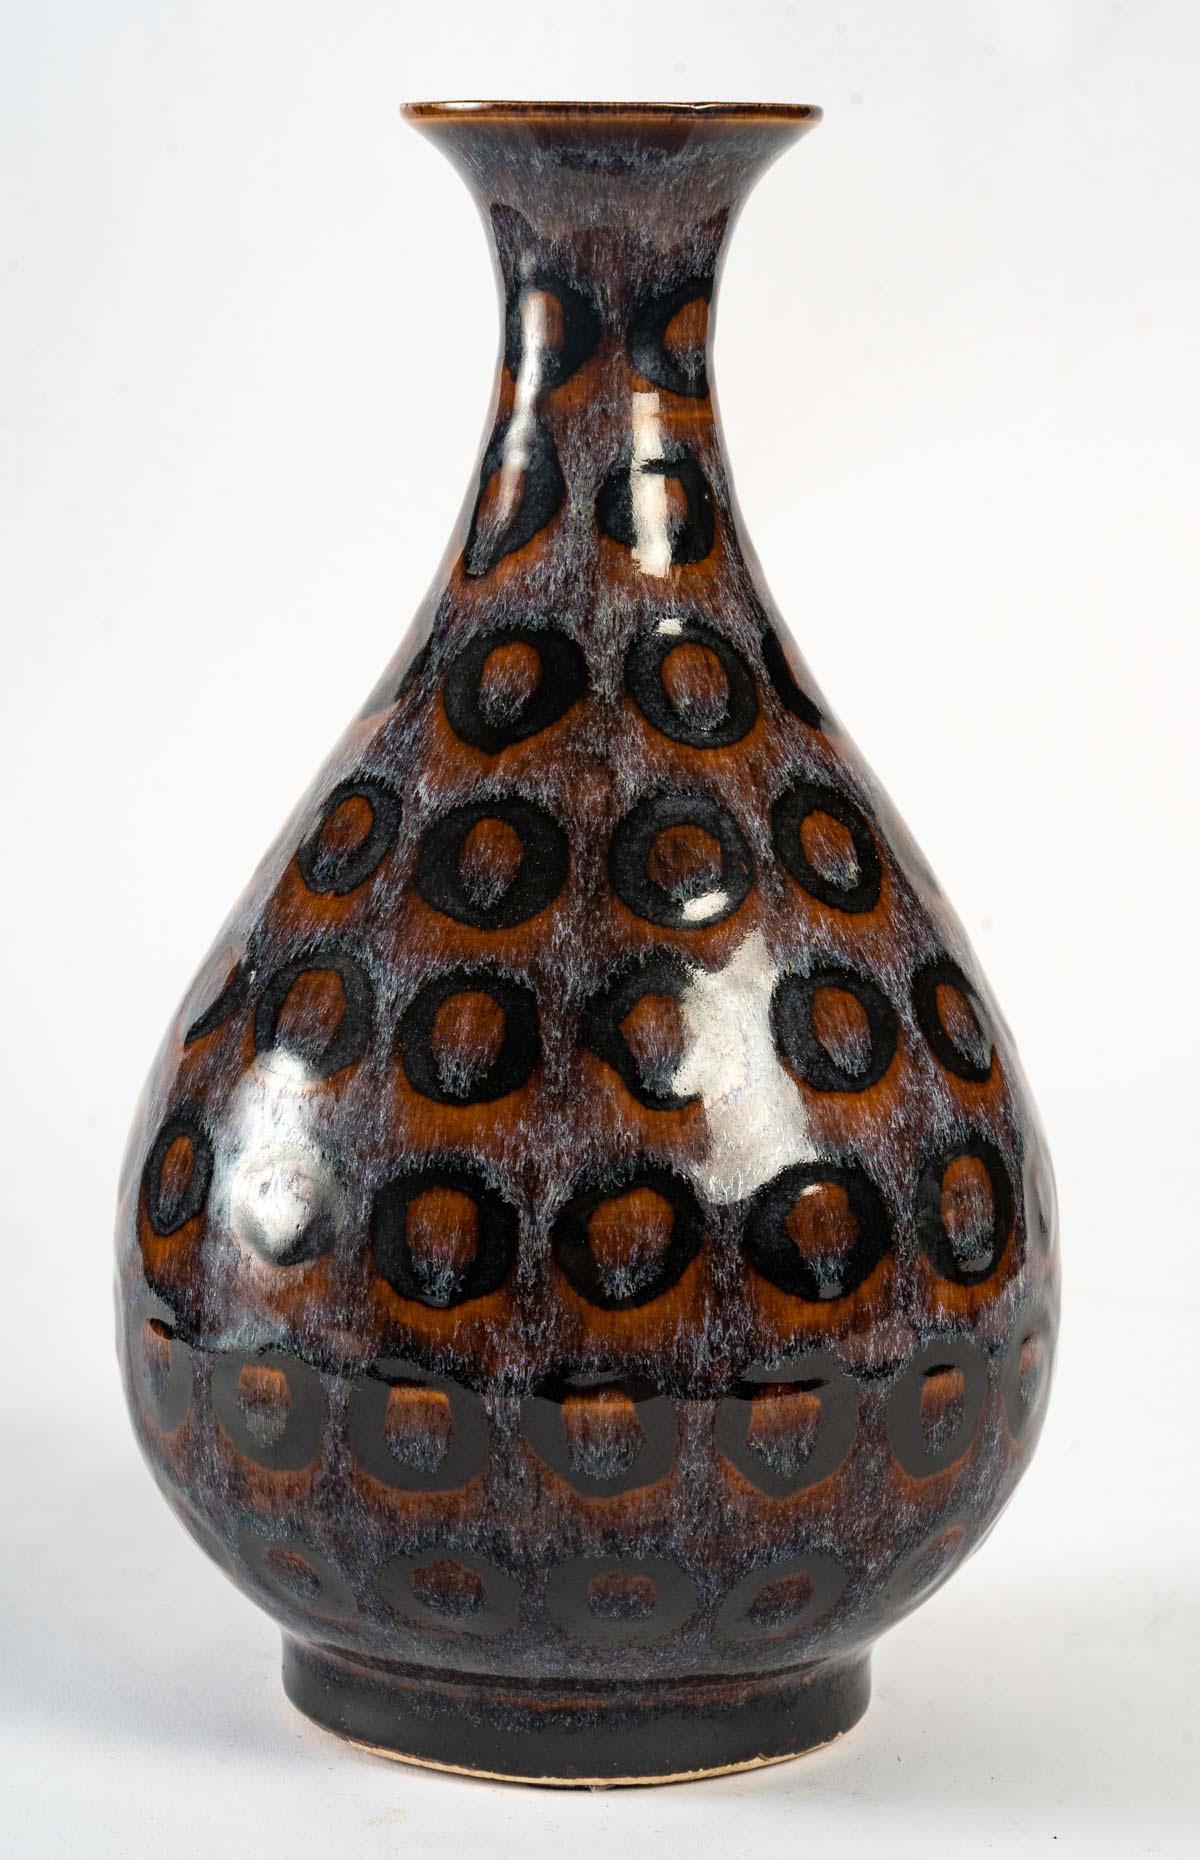 An enamelled stoneware vase with a rare ocellated decoration of rust and black on a shaded grey background.
China, Republic period. No damage. 
Measures: H: 31 cm, D: 17 cm.